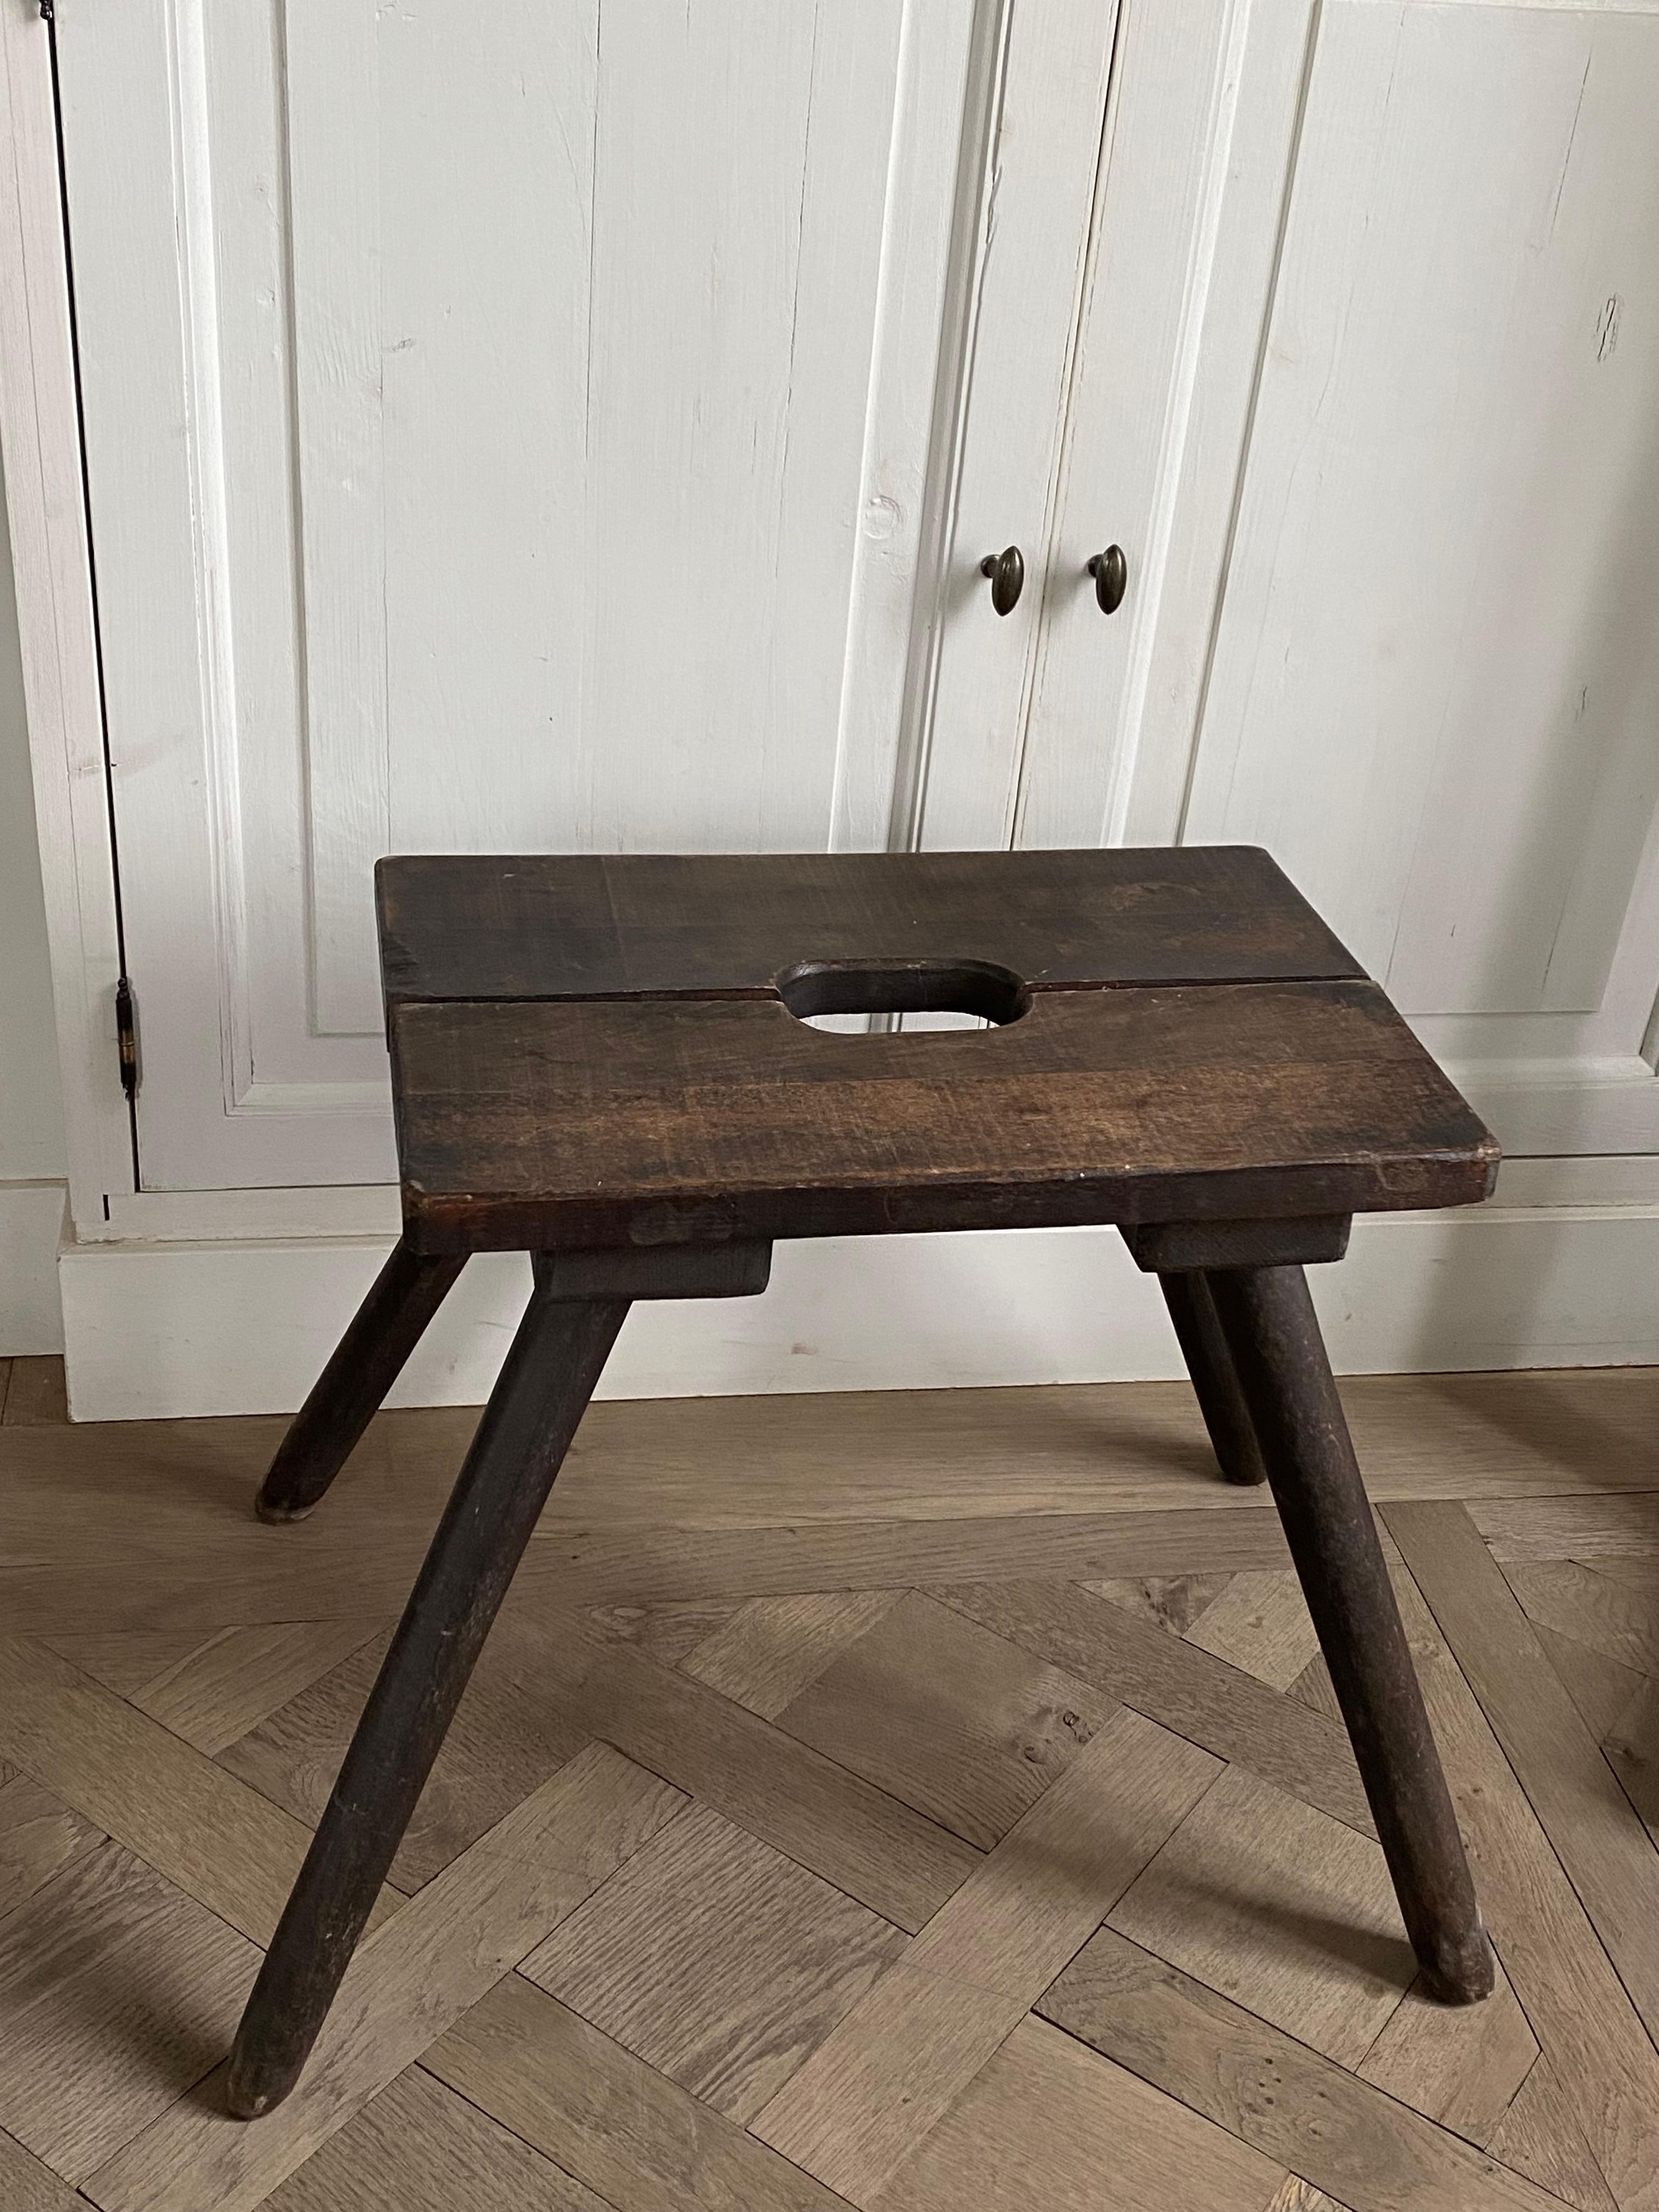 This beautiful minimalist stool from a Belgian artist's studio from the 1920s is in very nice vintage condition.
The seat is 44 x 30 cm and 45 cm high, the legs are wider.
Beautiful item with original patina.

We ship worldwide, feel free to request